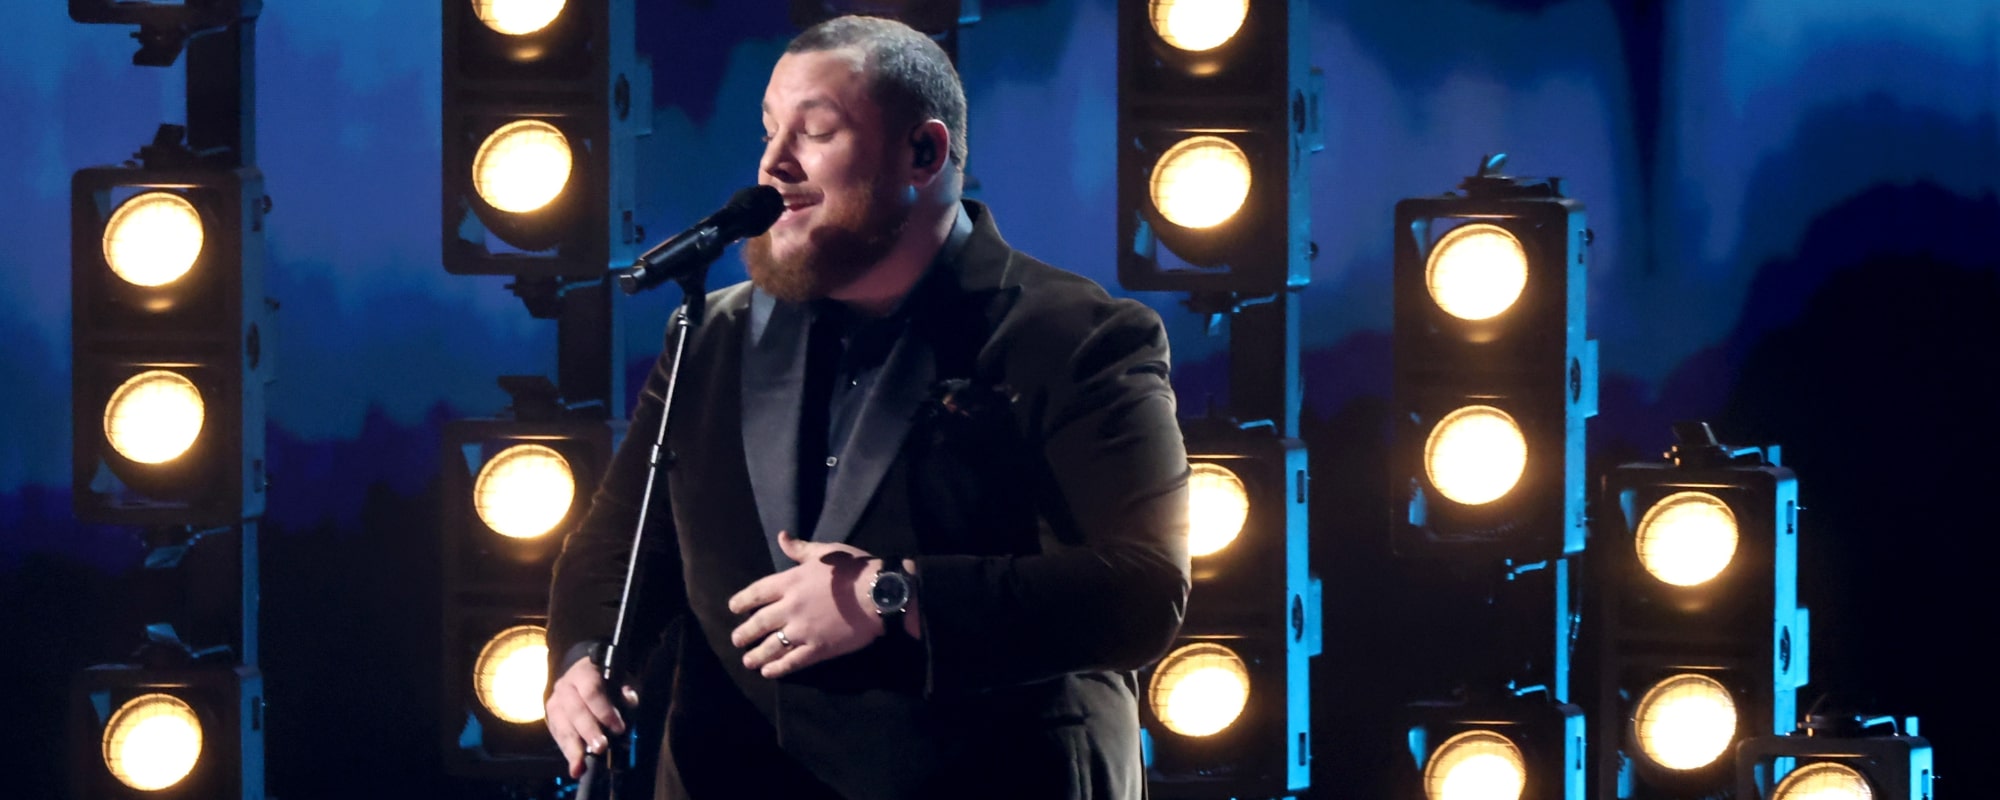 Luke Combs Achieves Incredibly Rare Feat with His Latest No. 1 Single “Where the Wild Things Are”